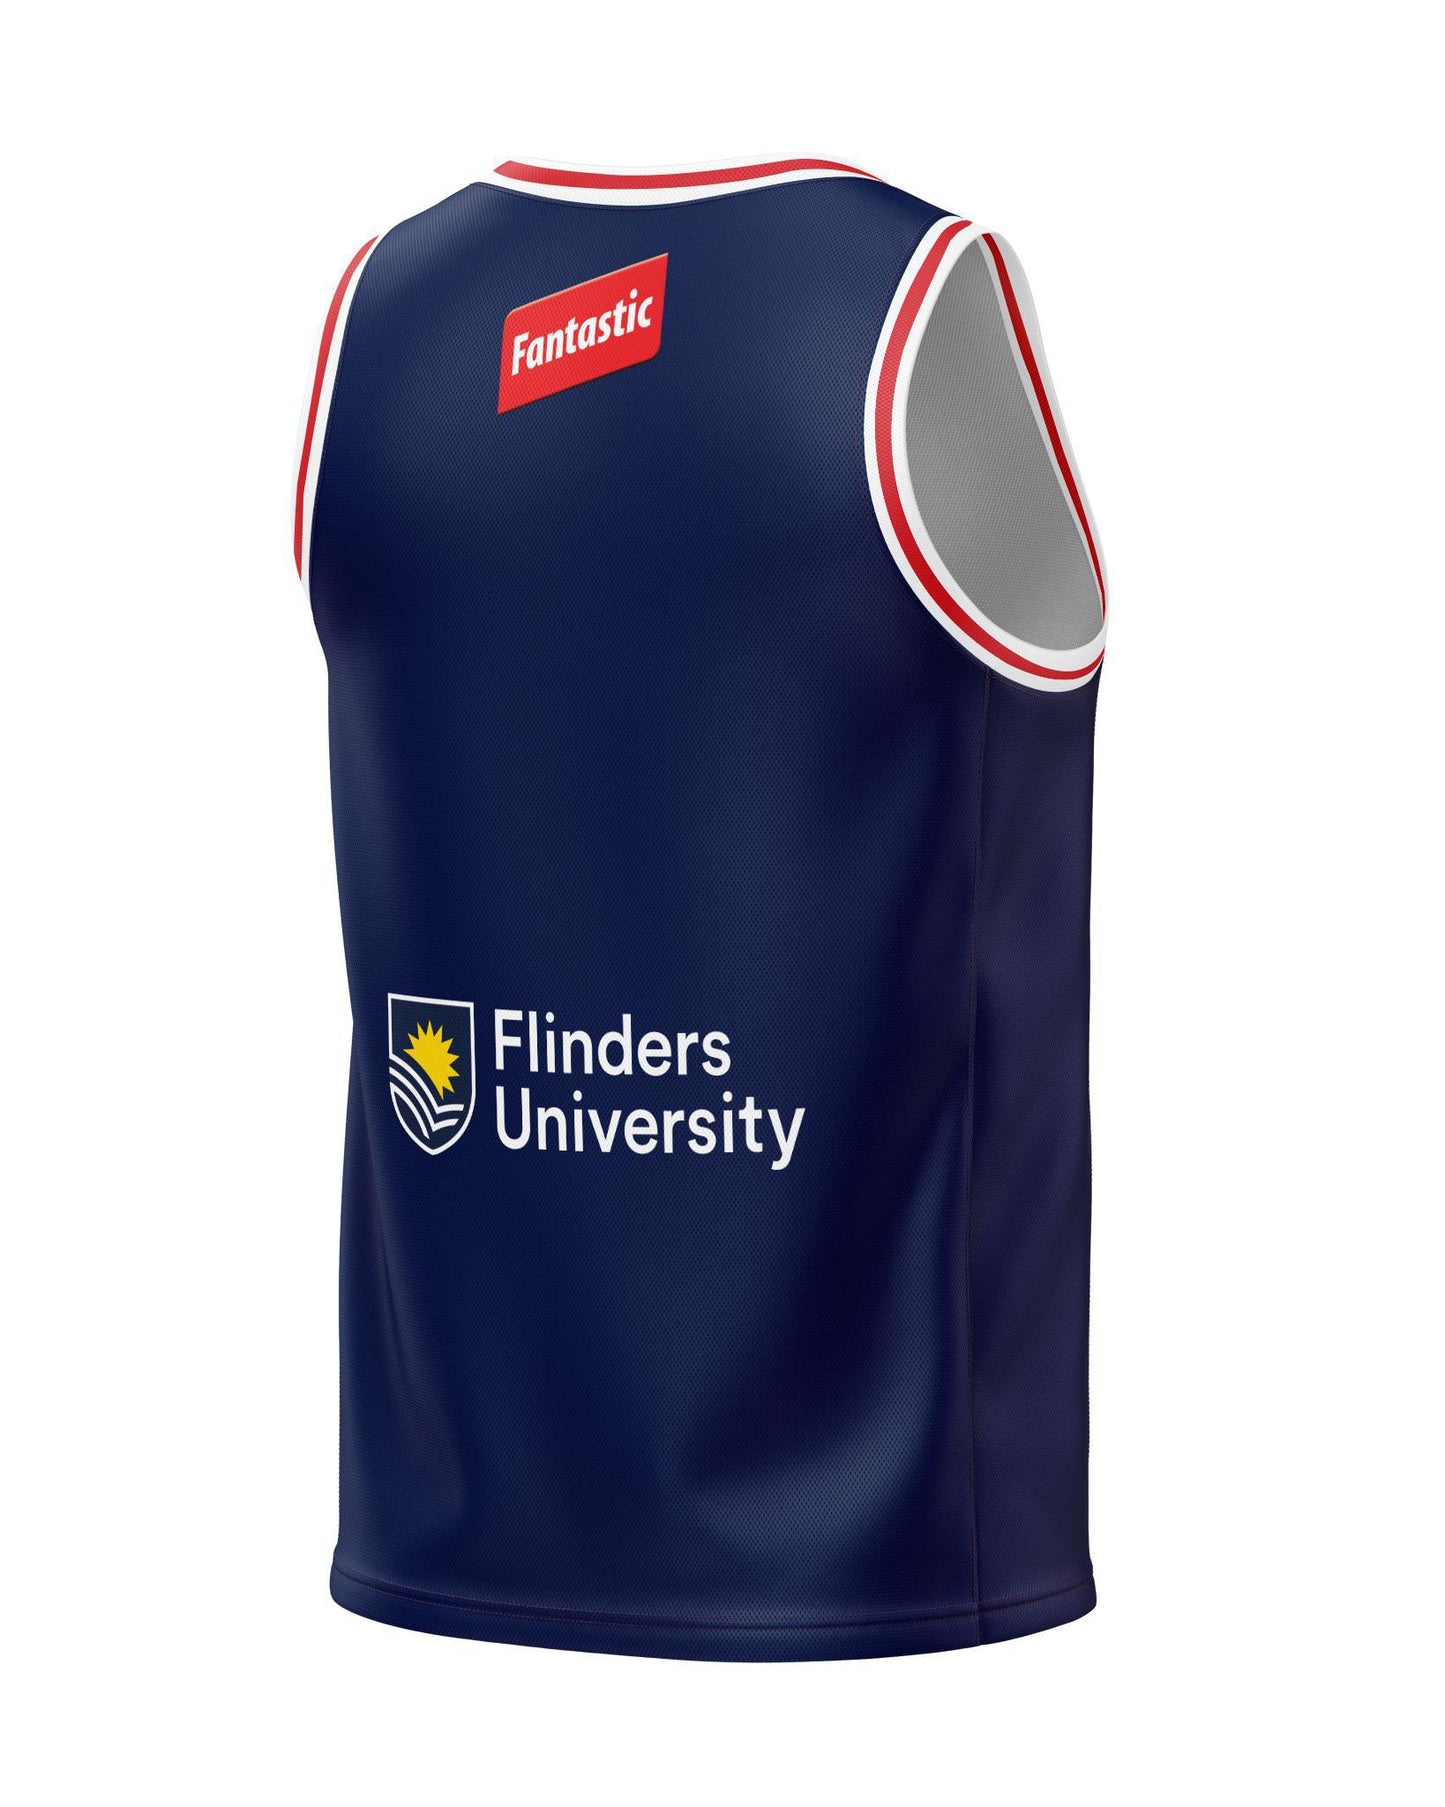 NBL24 Adult Adelaide 36ers Home Jerseys